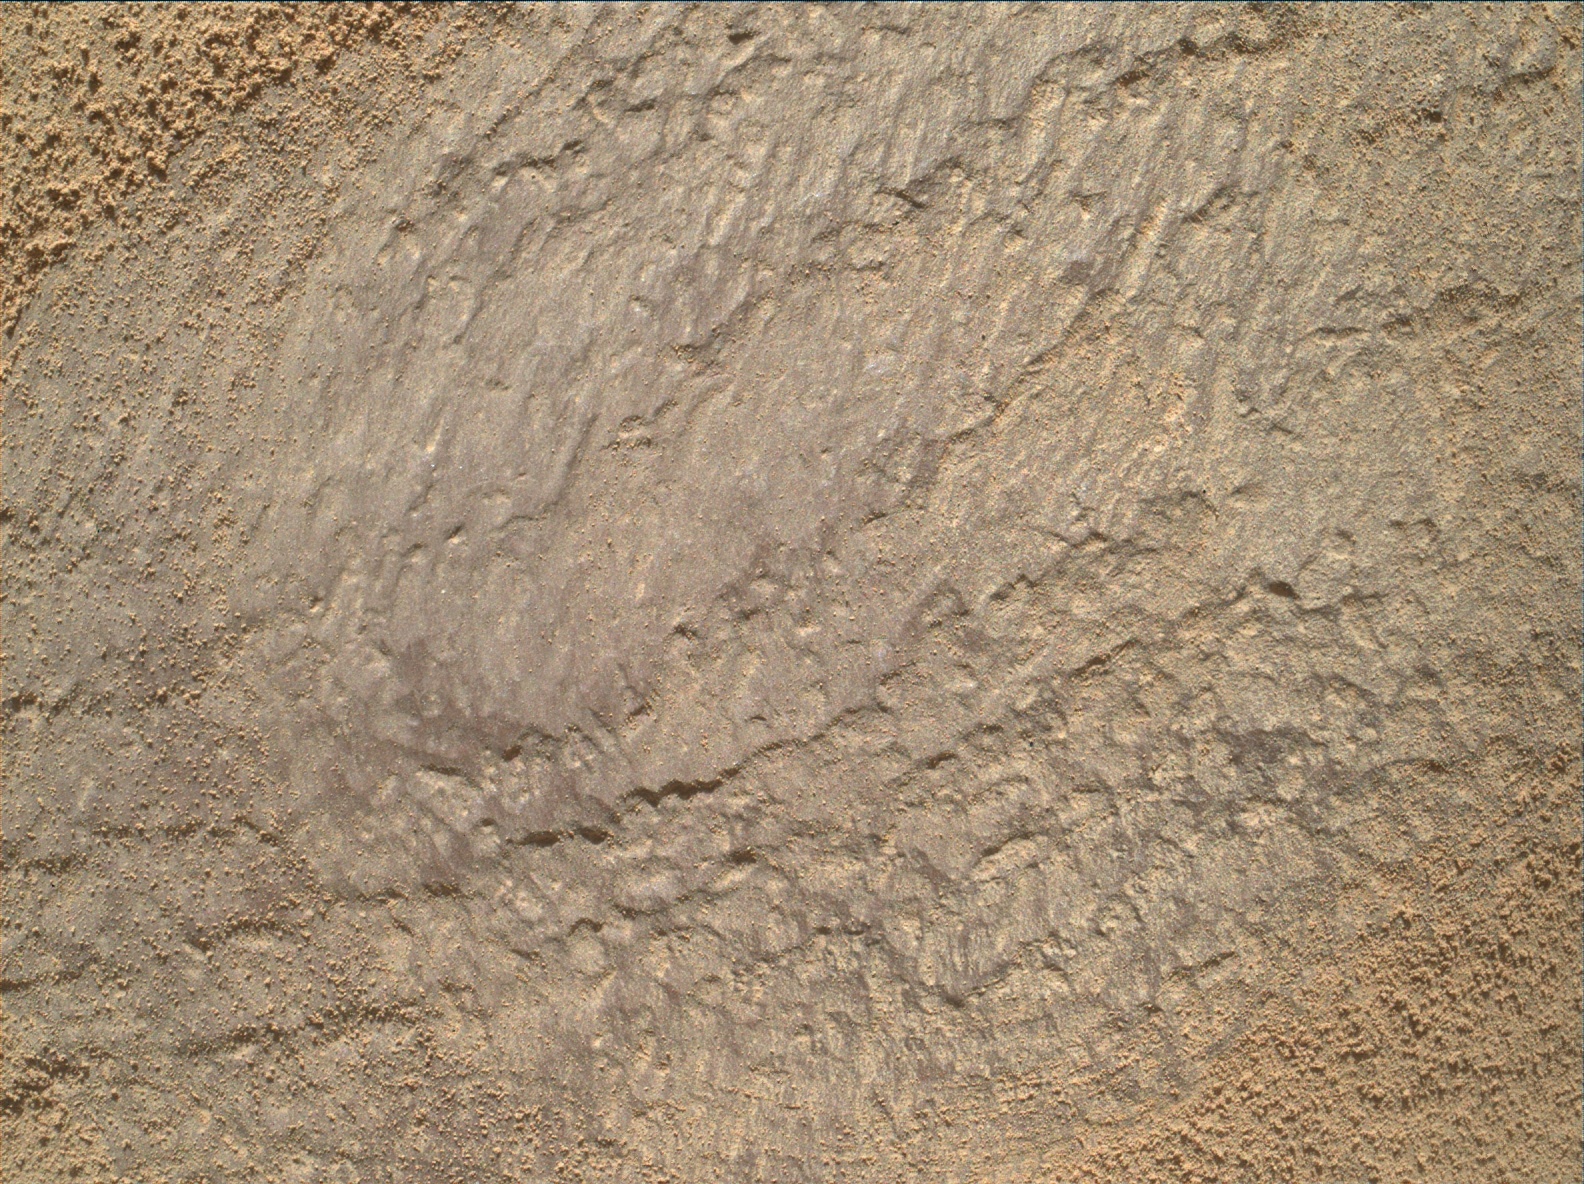 Nasa's Mars rover Curiosity acquired this image using its Mars Hand Lens Imager (MAHLI) on Sol 1167